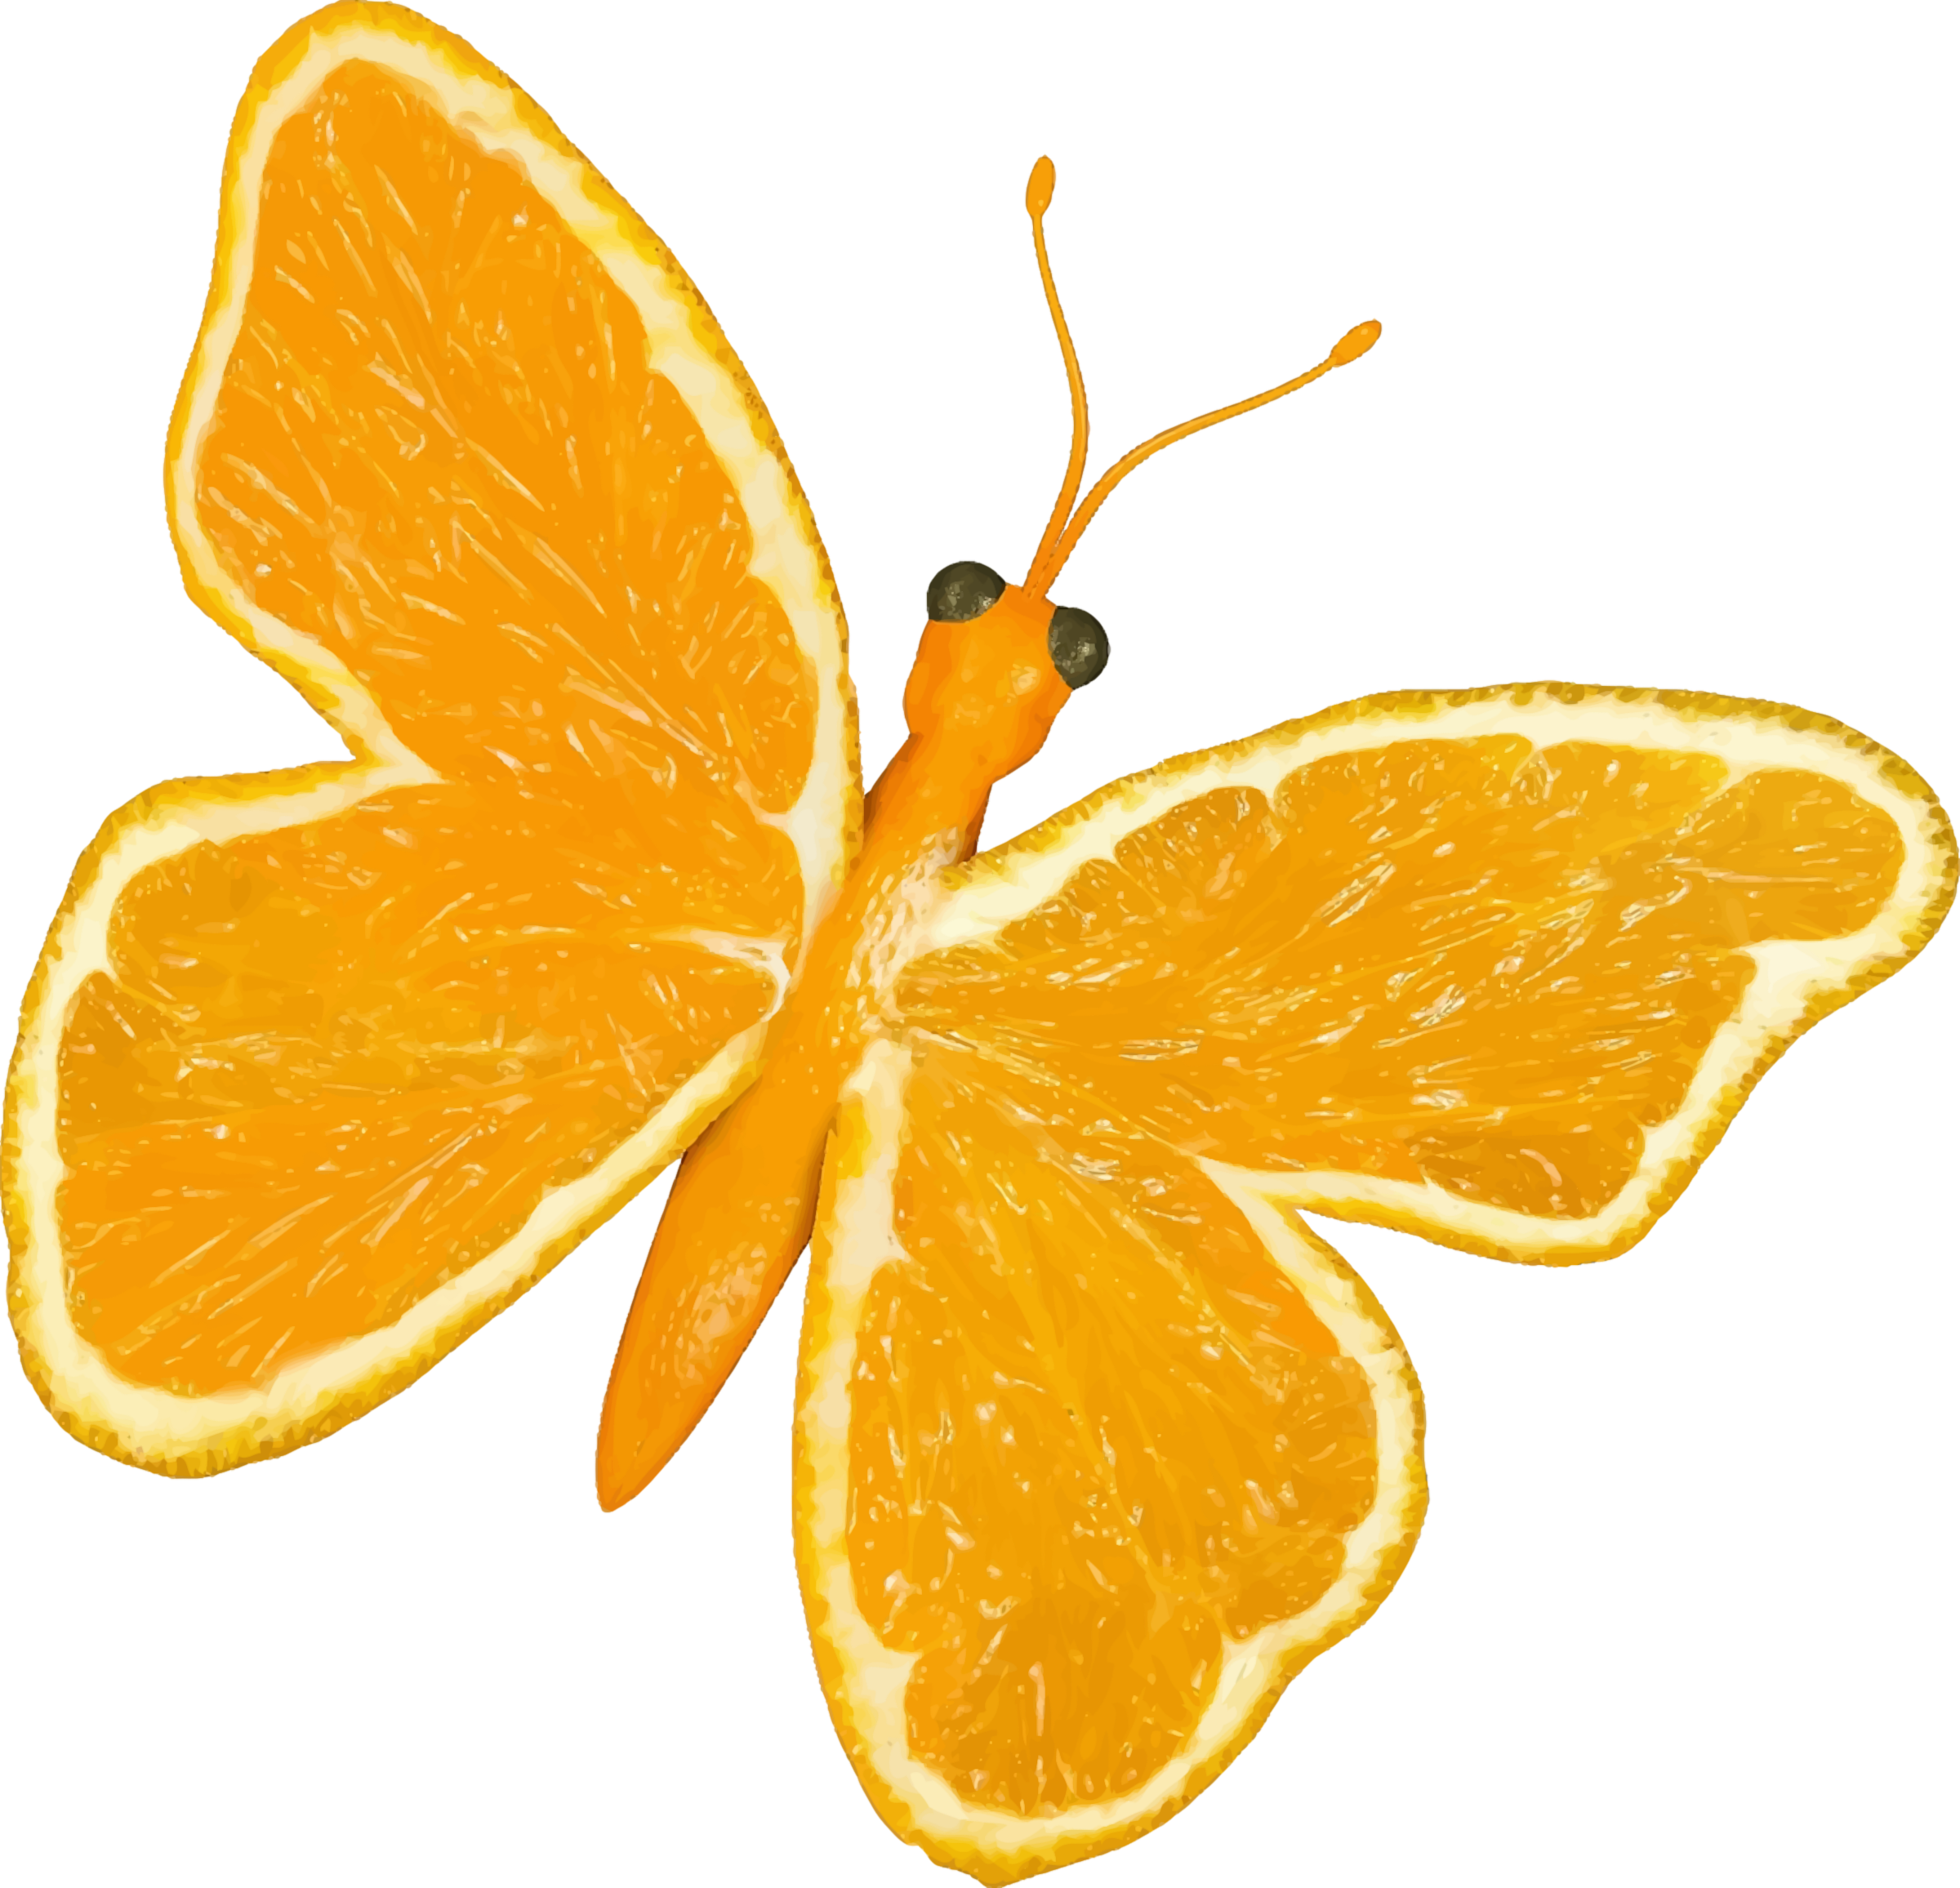 Big Image - Butterfly Oranges (2400x2312)